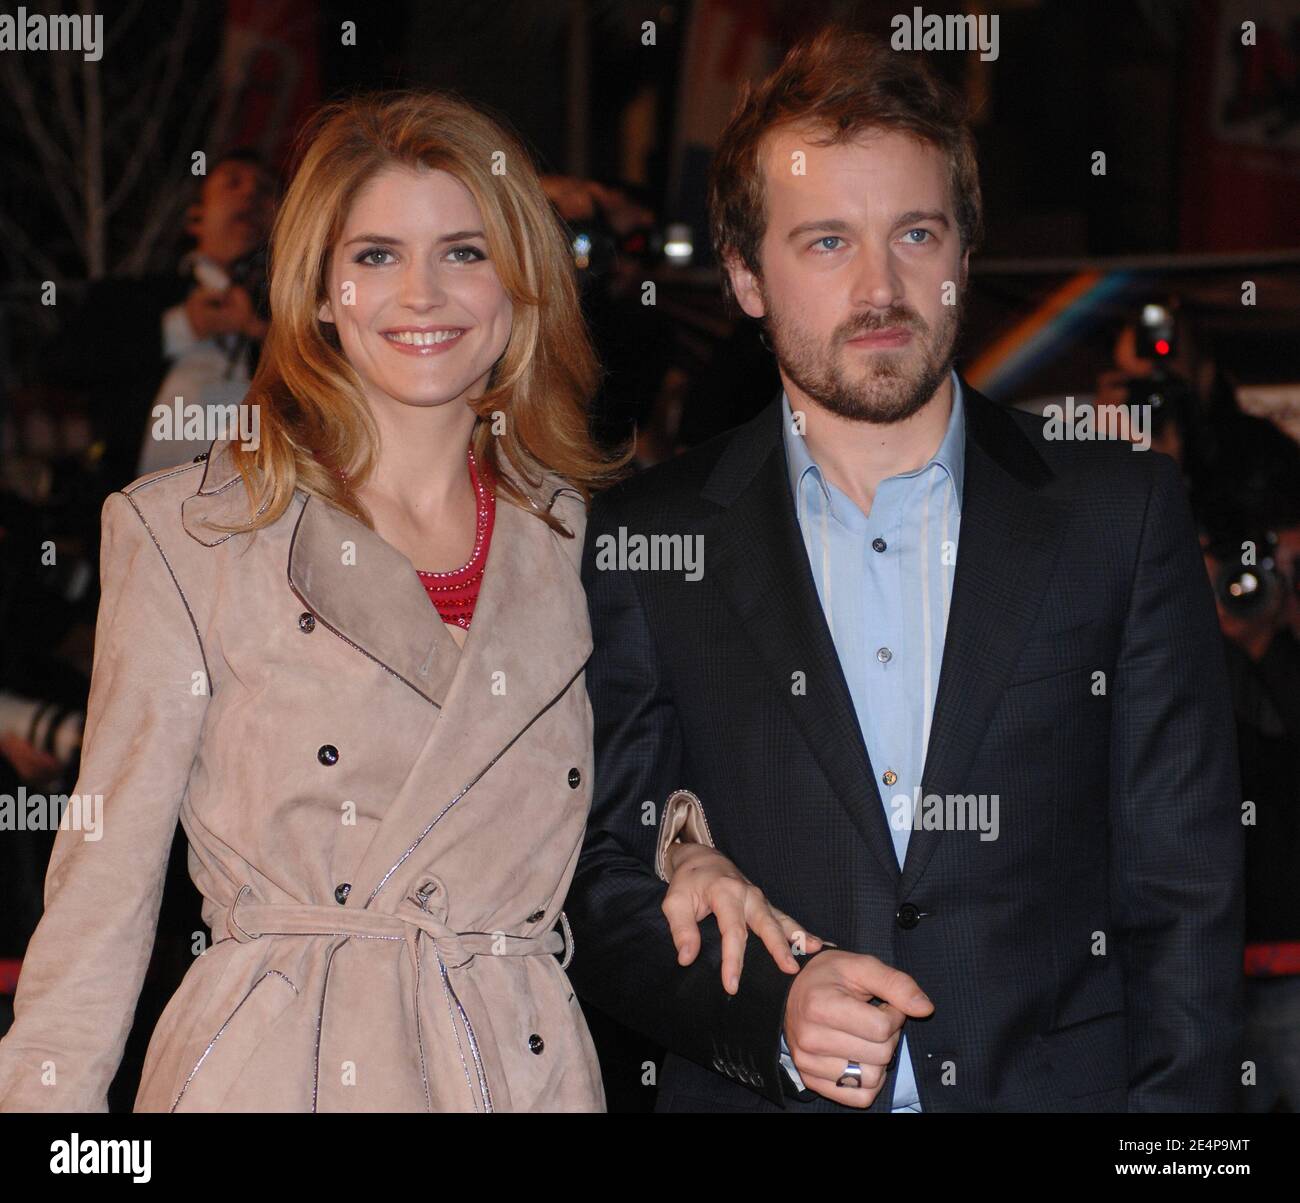 French actress Alice Taglioni and her husband arrive to the 9th annual NRJ Music Awards held at the Palais des Festivals in Cannes, France, on January 26, 2008. Photo by Khayat-Nebinger/ABACAPRESS.COM Stock Photo